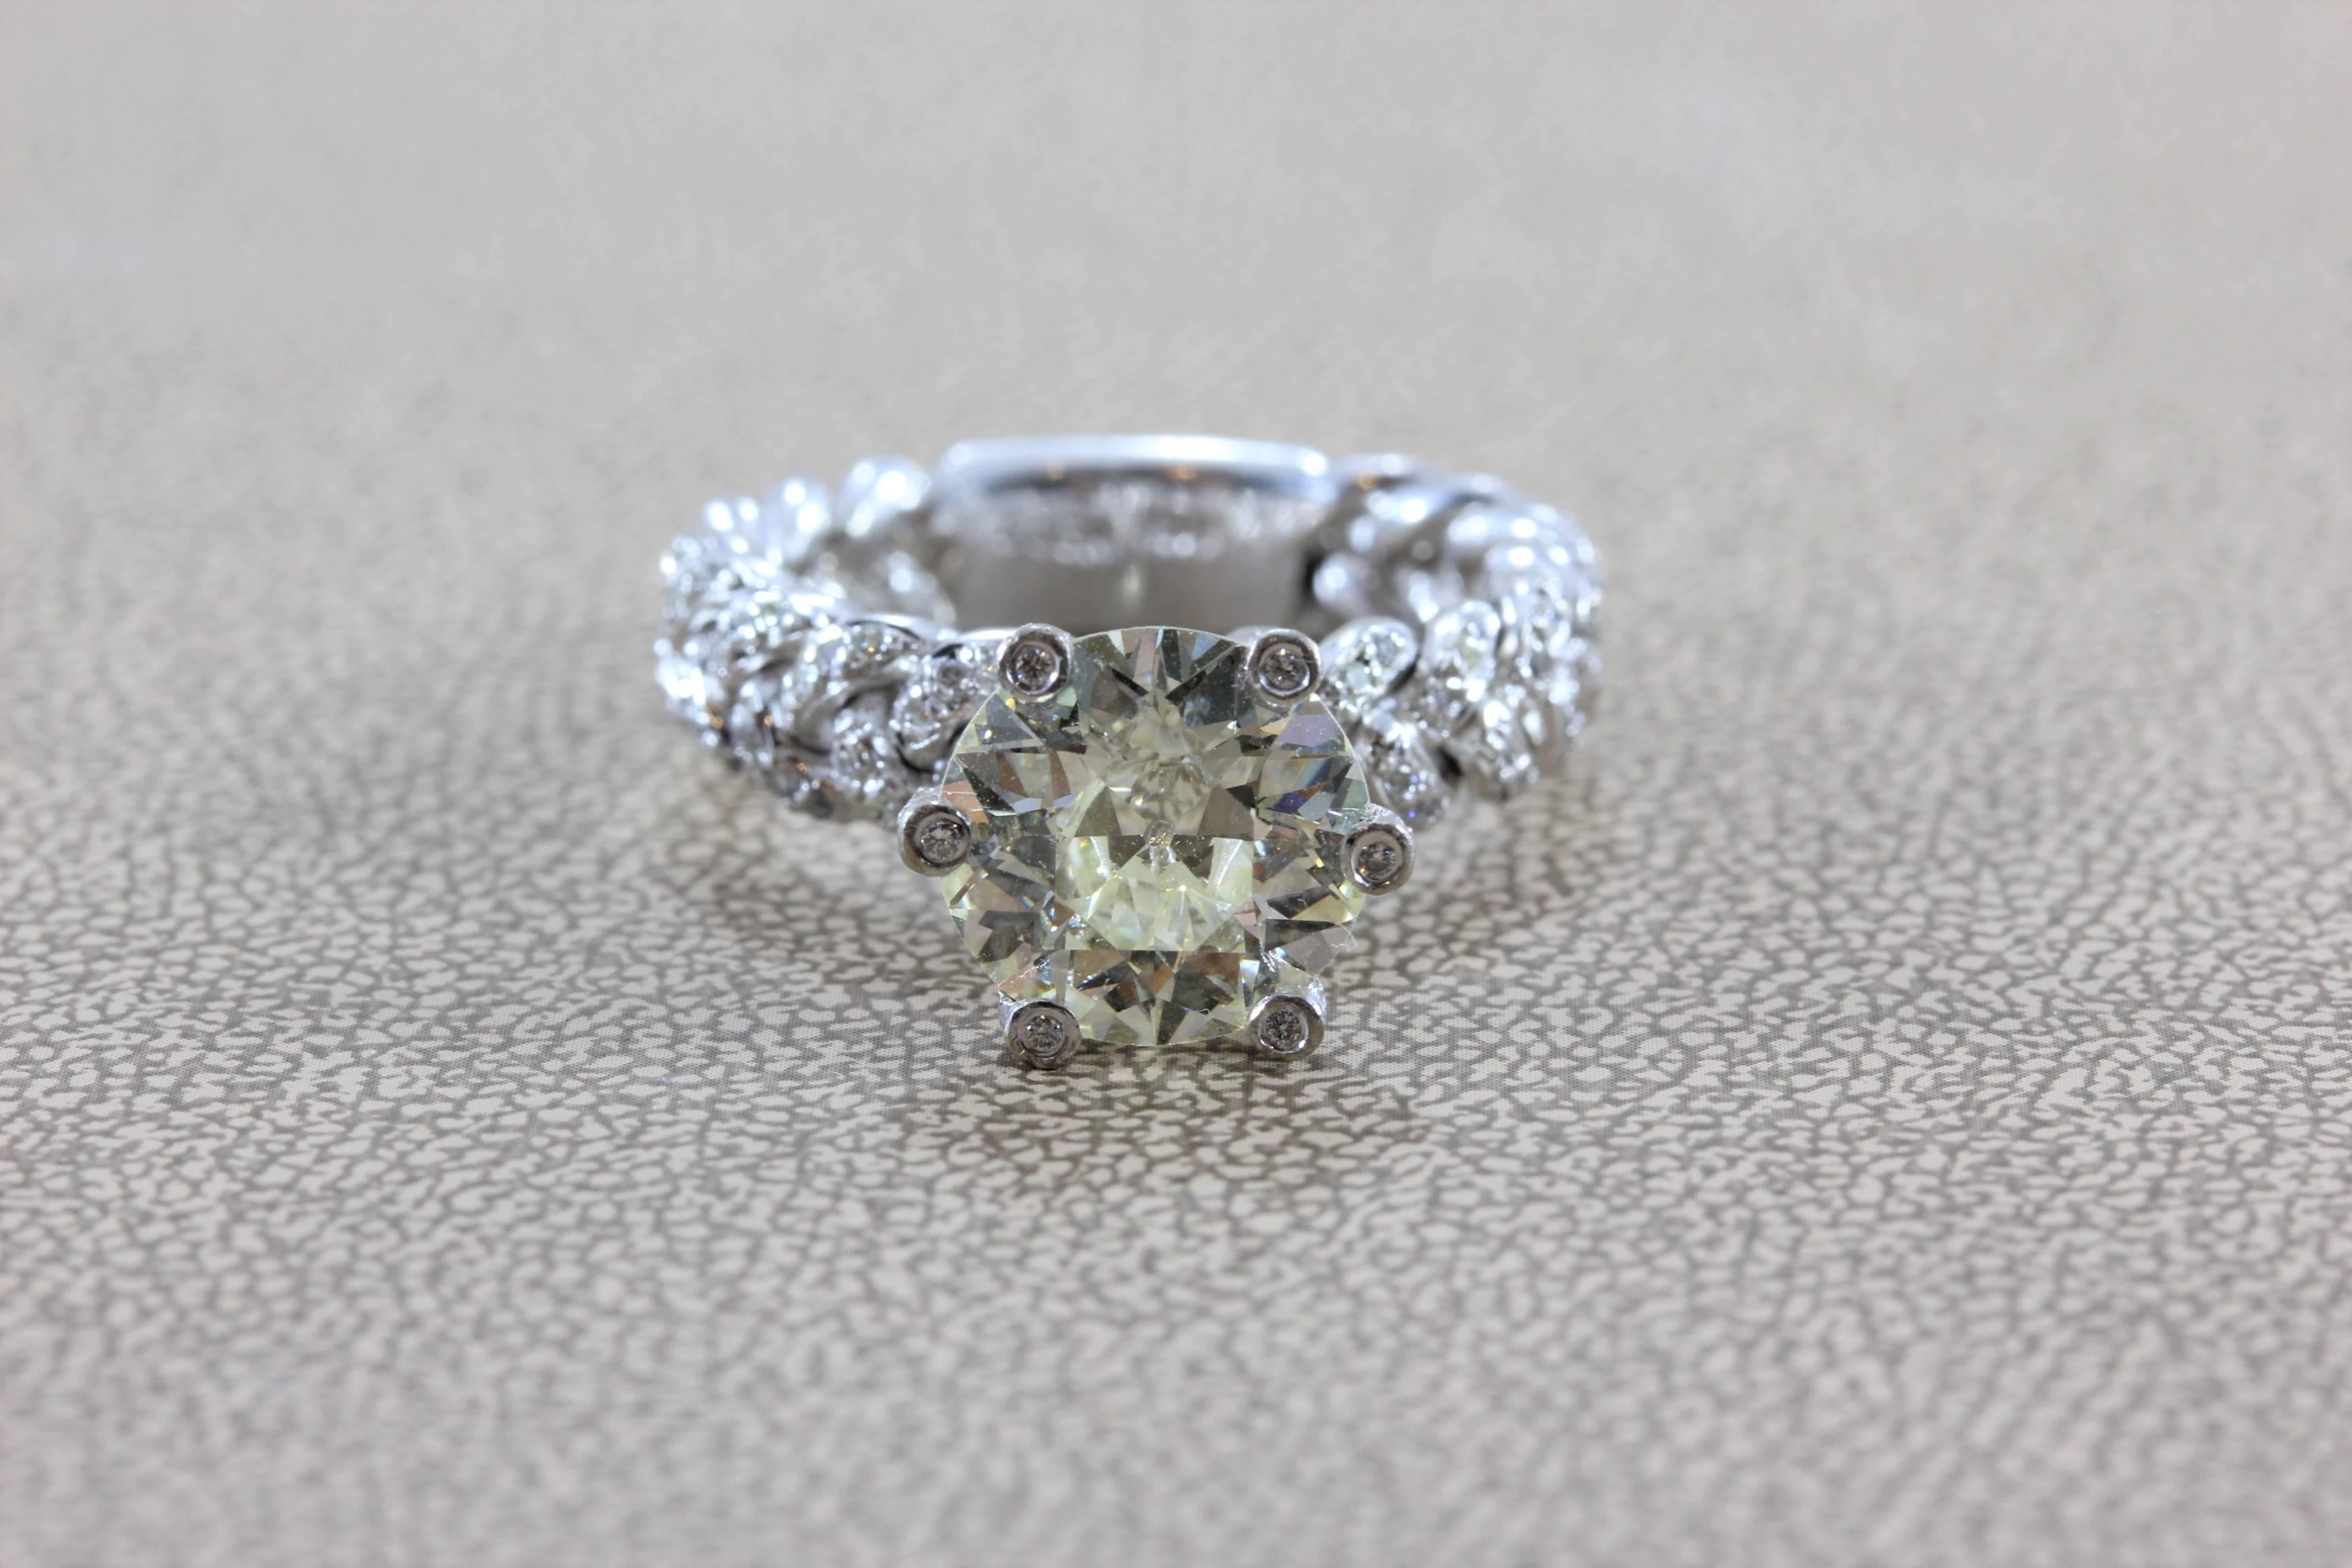 A wonderfully unique engagement ring featuring a 3.50 carat round European cut diamond that has amazing fire and brilliance. It is set in a white gold 6 claw prong setting, which have diamonds set in them. Diamonds are set across the braided